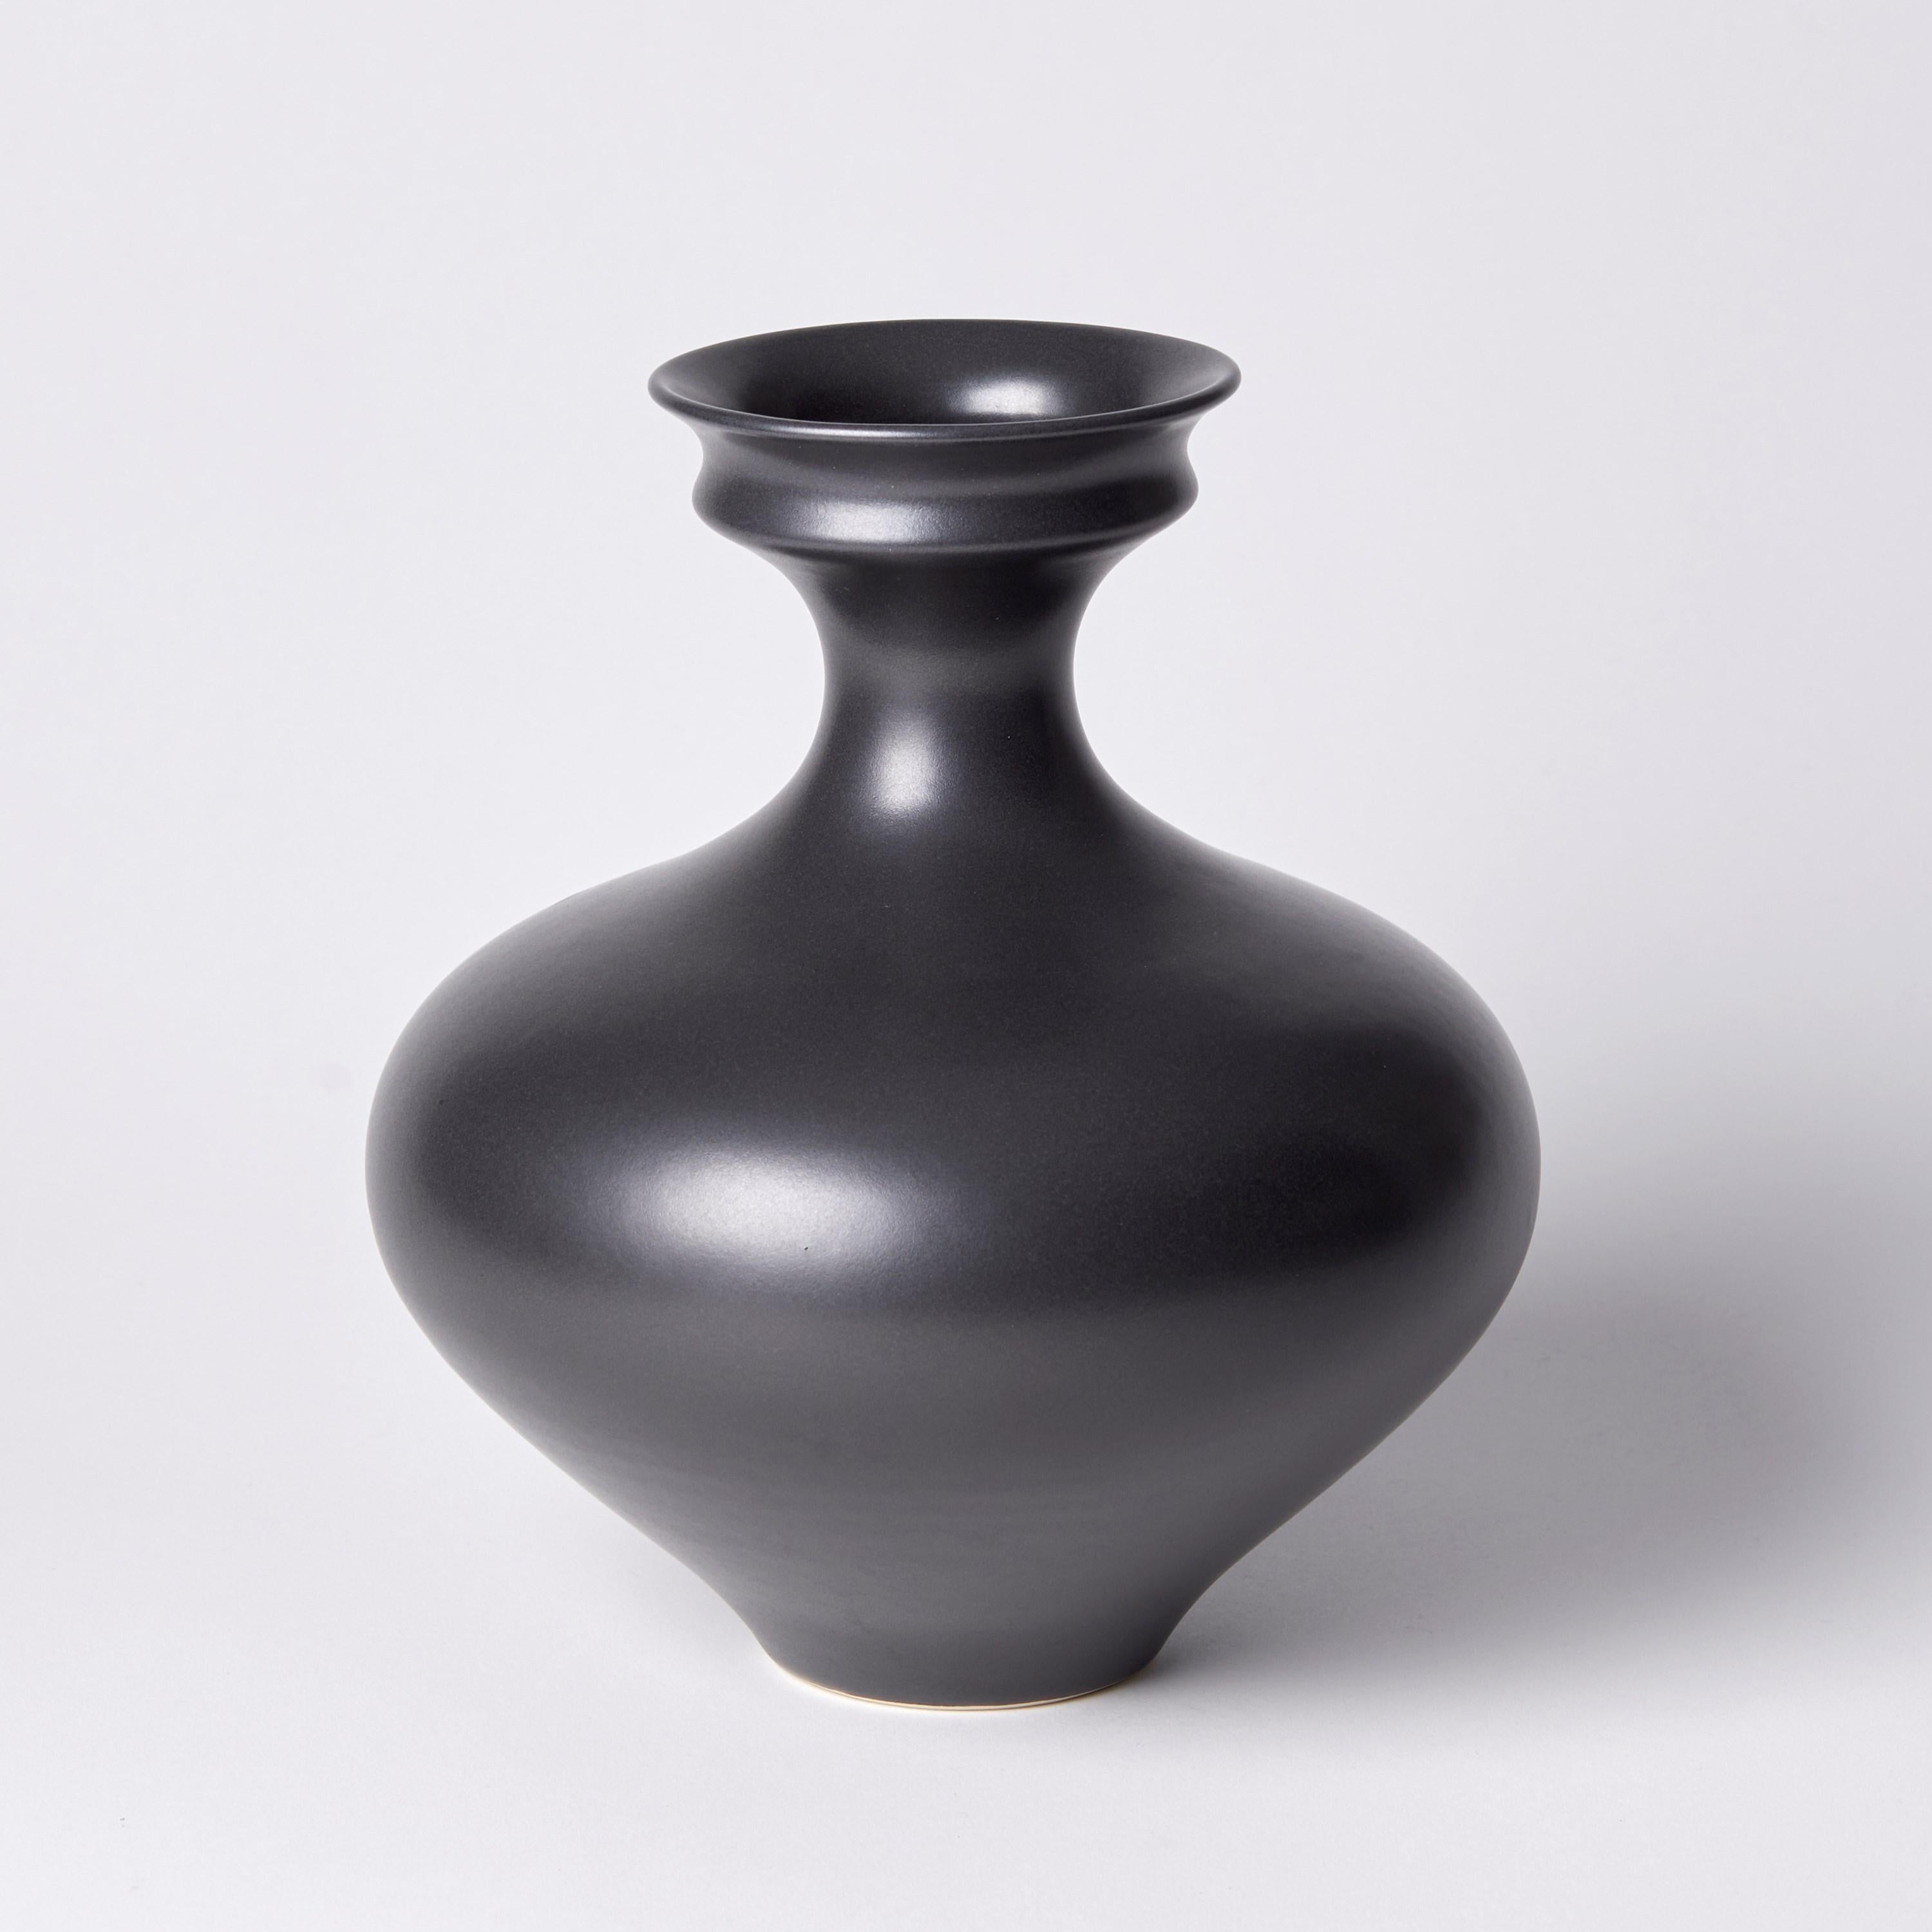 ‘Dish mouth vase I’ is a unique porcelain sculptural vessel by the British artist, Vivienne Foley, which has been released from her own personal archive of artworks. 

Vivienne Foley is based in Gloucestershire where she produces exquisite ceramic